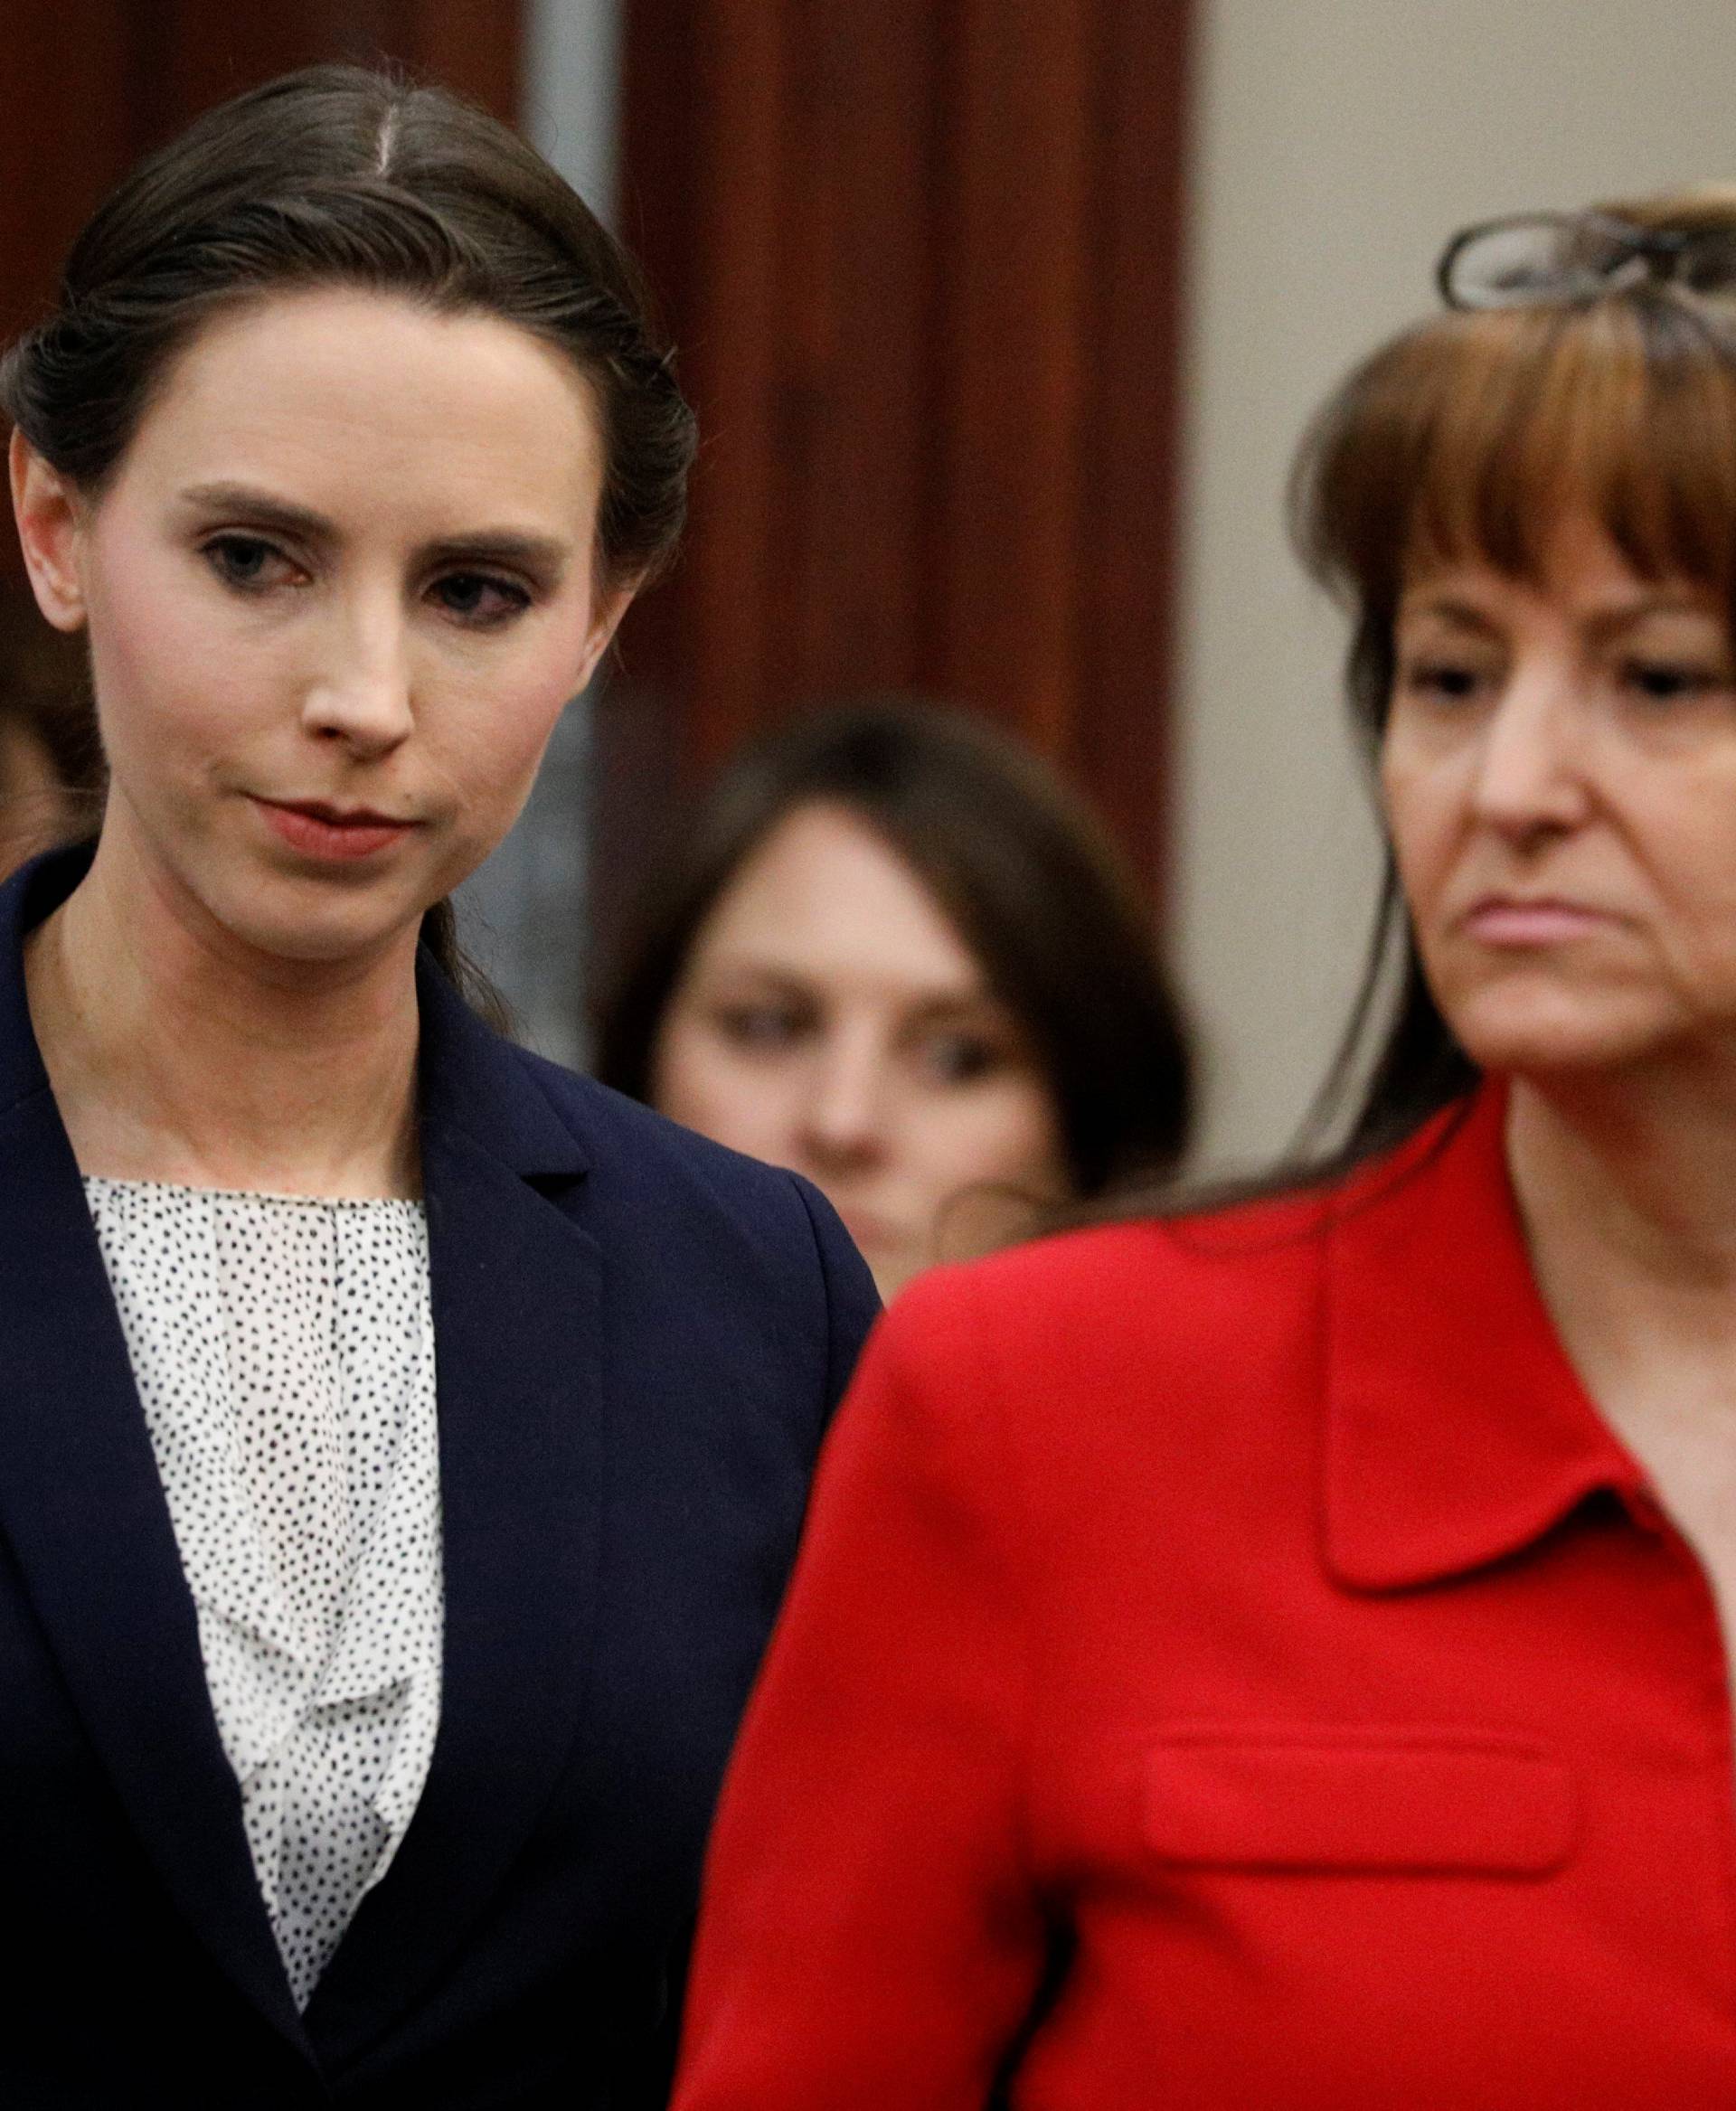 Victim Rachael Denhollander arrives at the sentencing hearing for Larry Nassar, a former team USA Gymnastics doctor who pleaded guilty in November 2017 to sexual assault charges, in Lansing